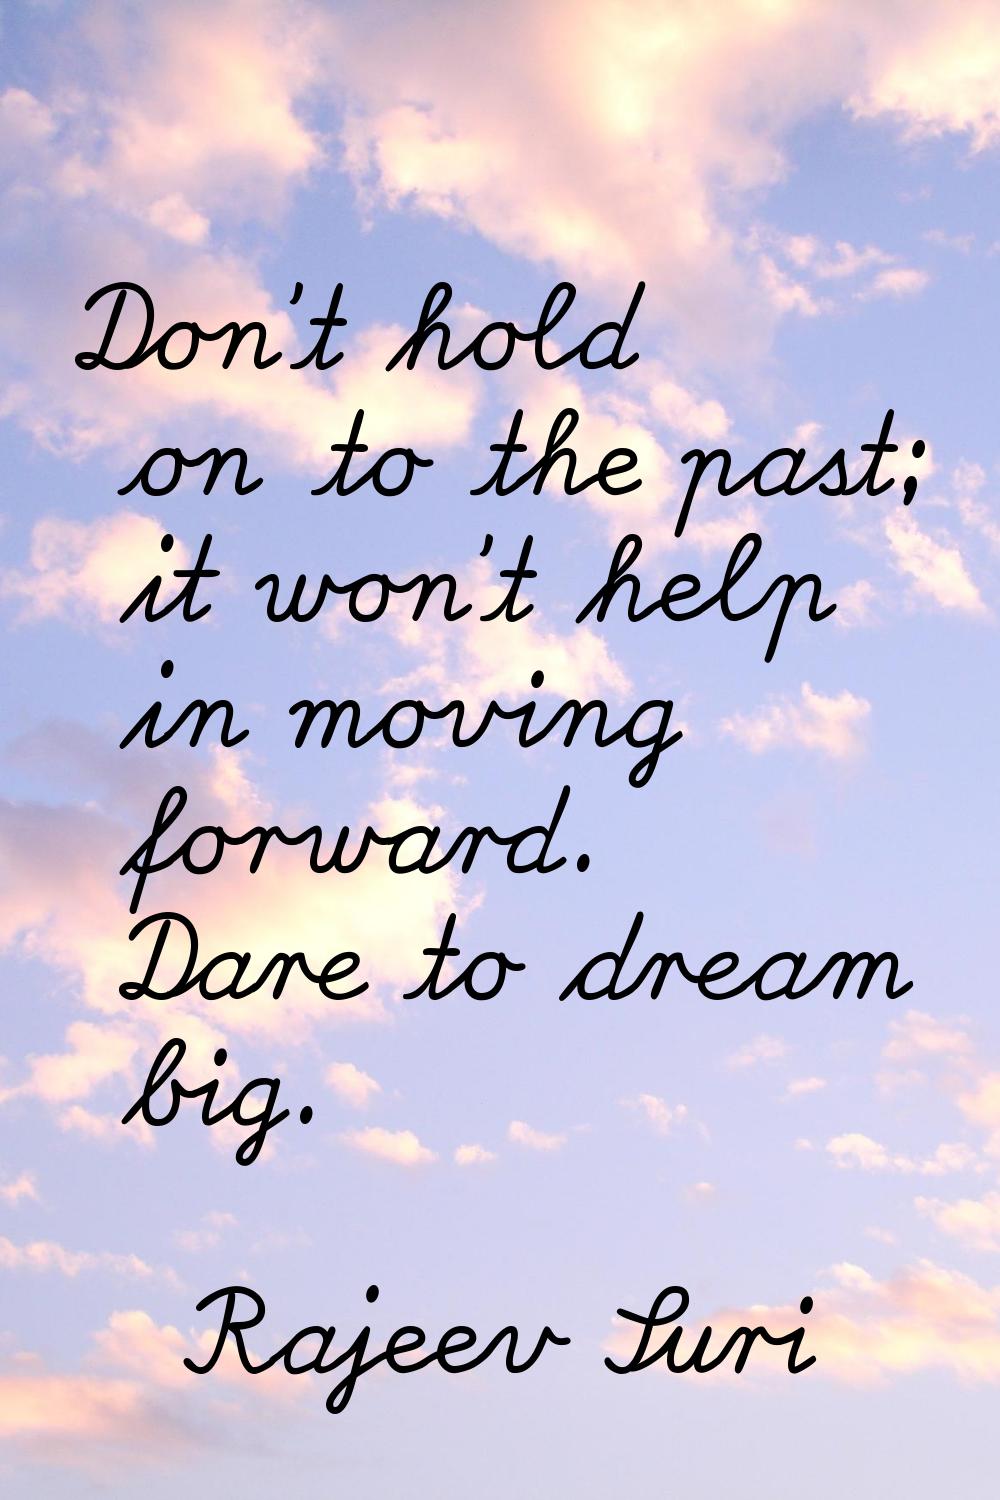 Don't hold on to the past; it won't help in moving forward. Dare to dream big.